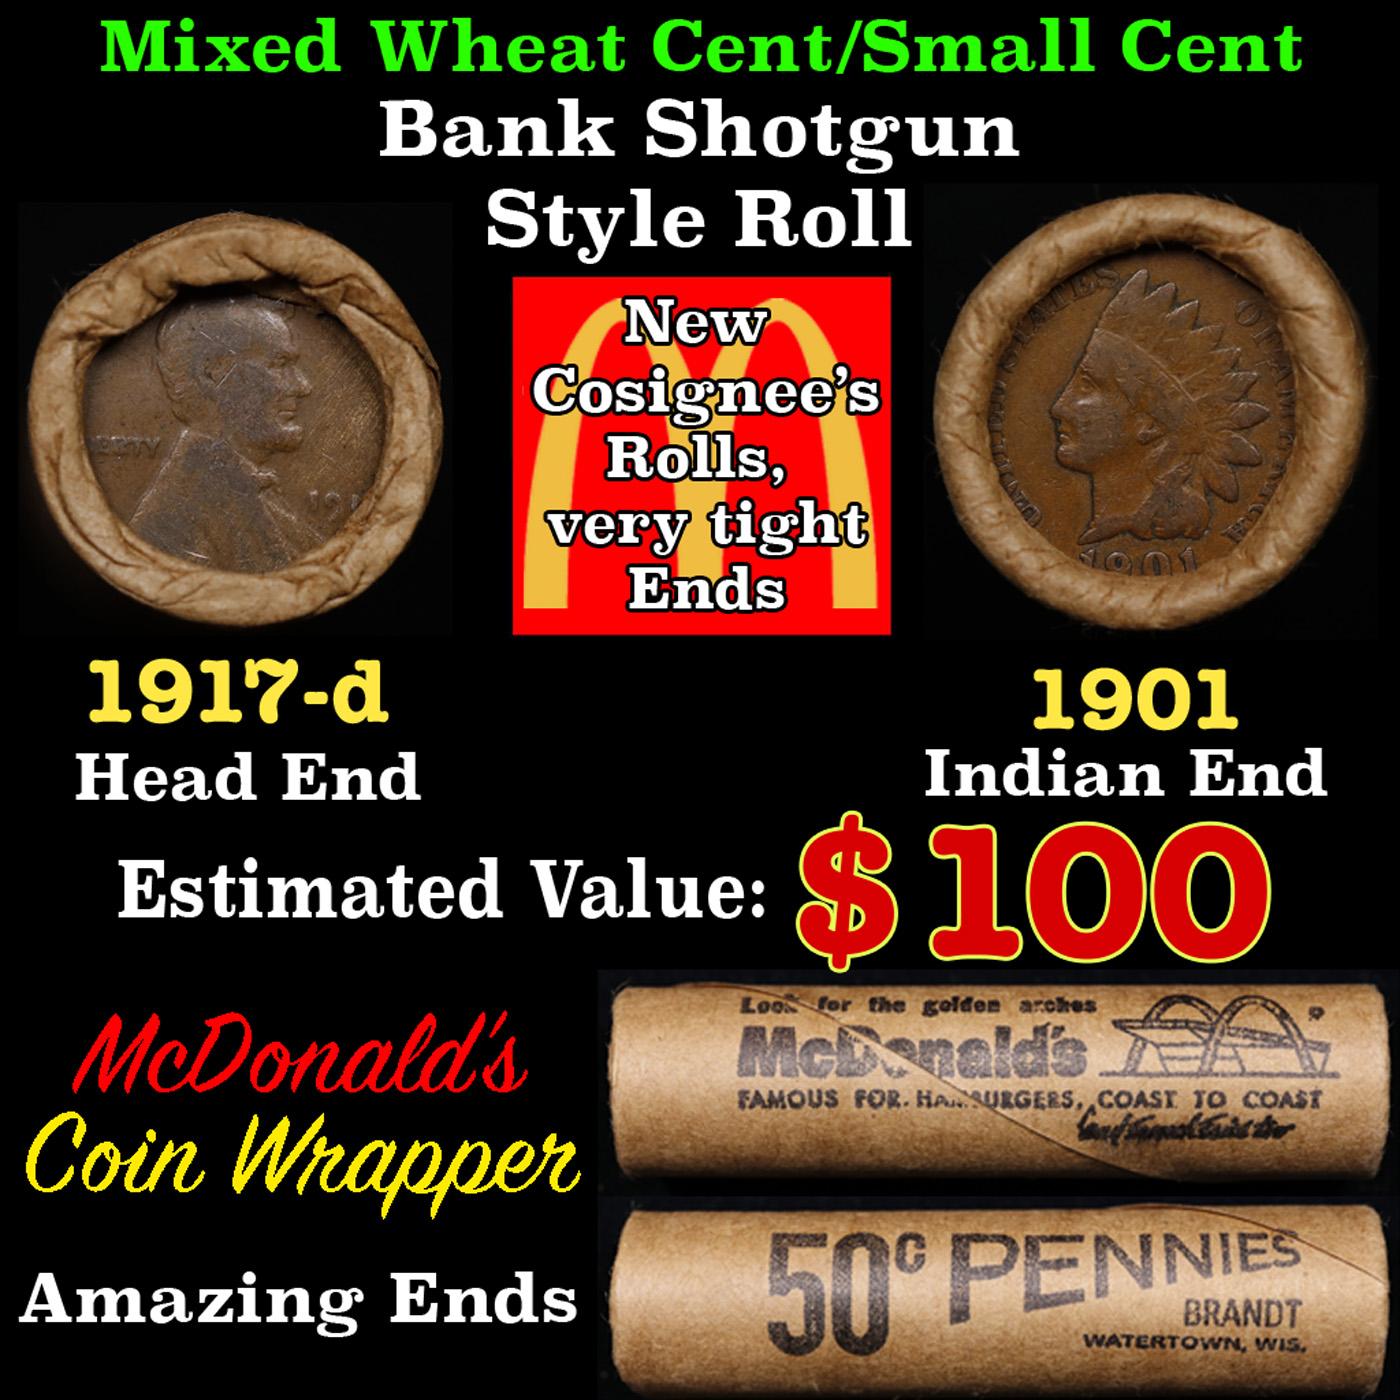 Lincoln Wheat Cent 1c Mixed Roll Orig Brandt McDonalds Wrapper, 1917-d end, 1901 Indian other end